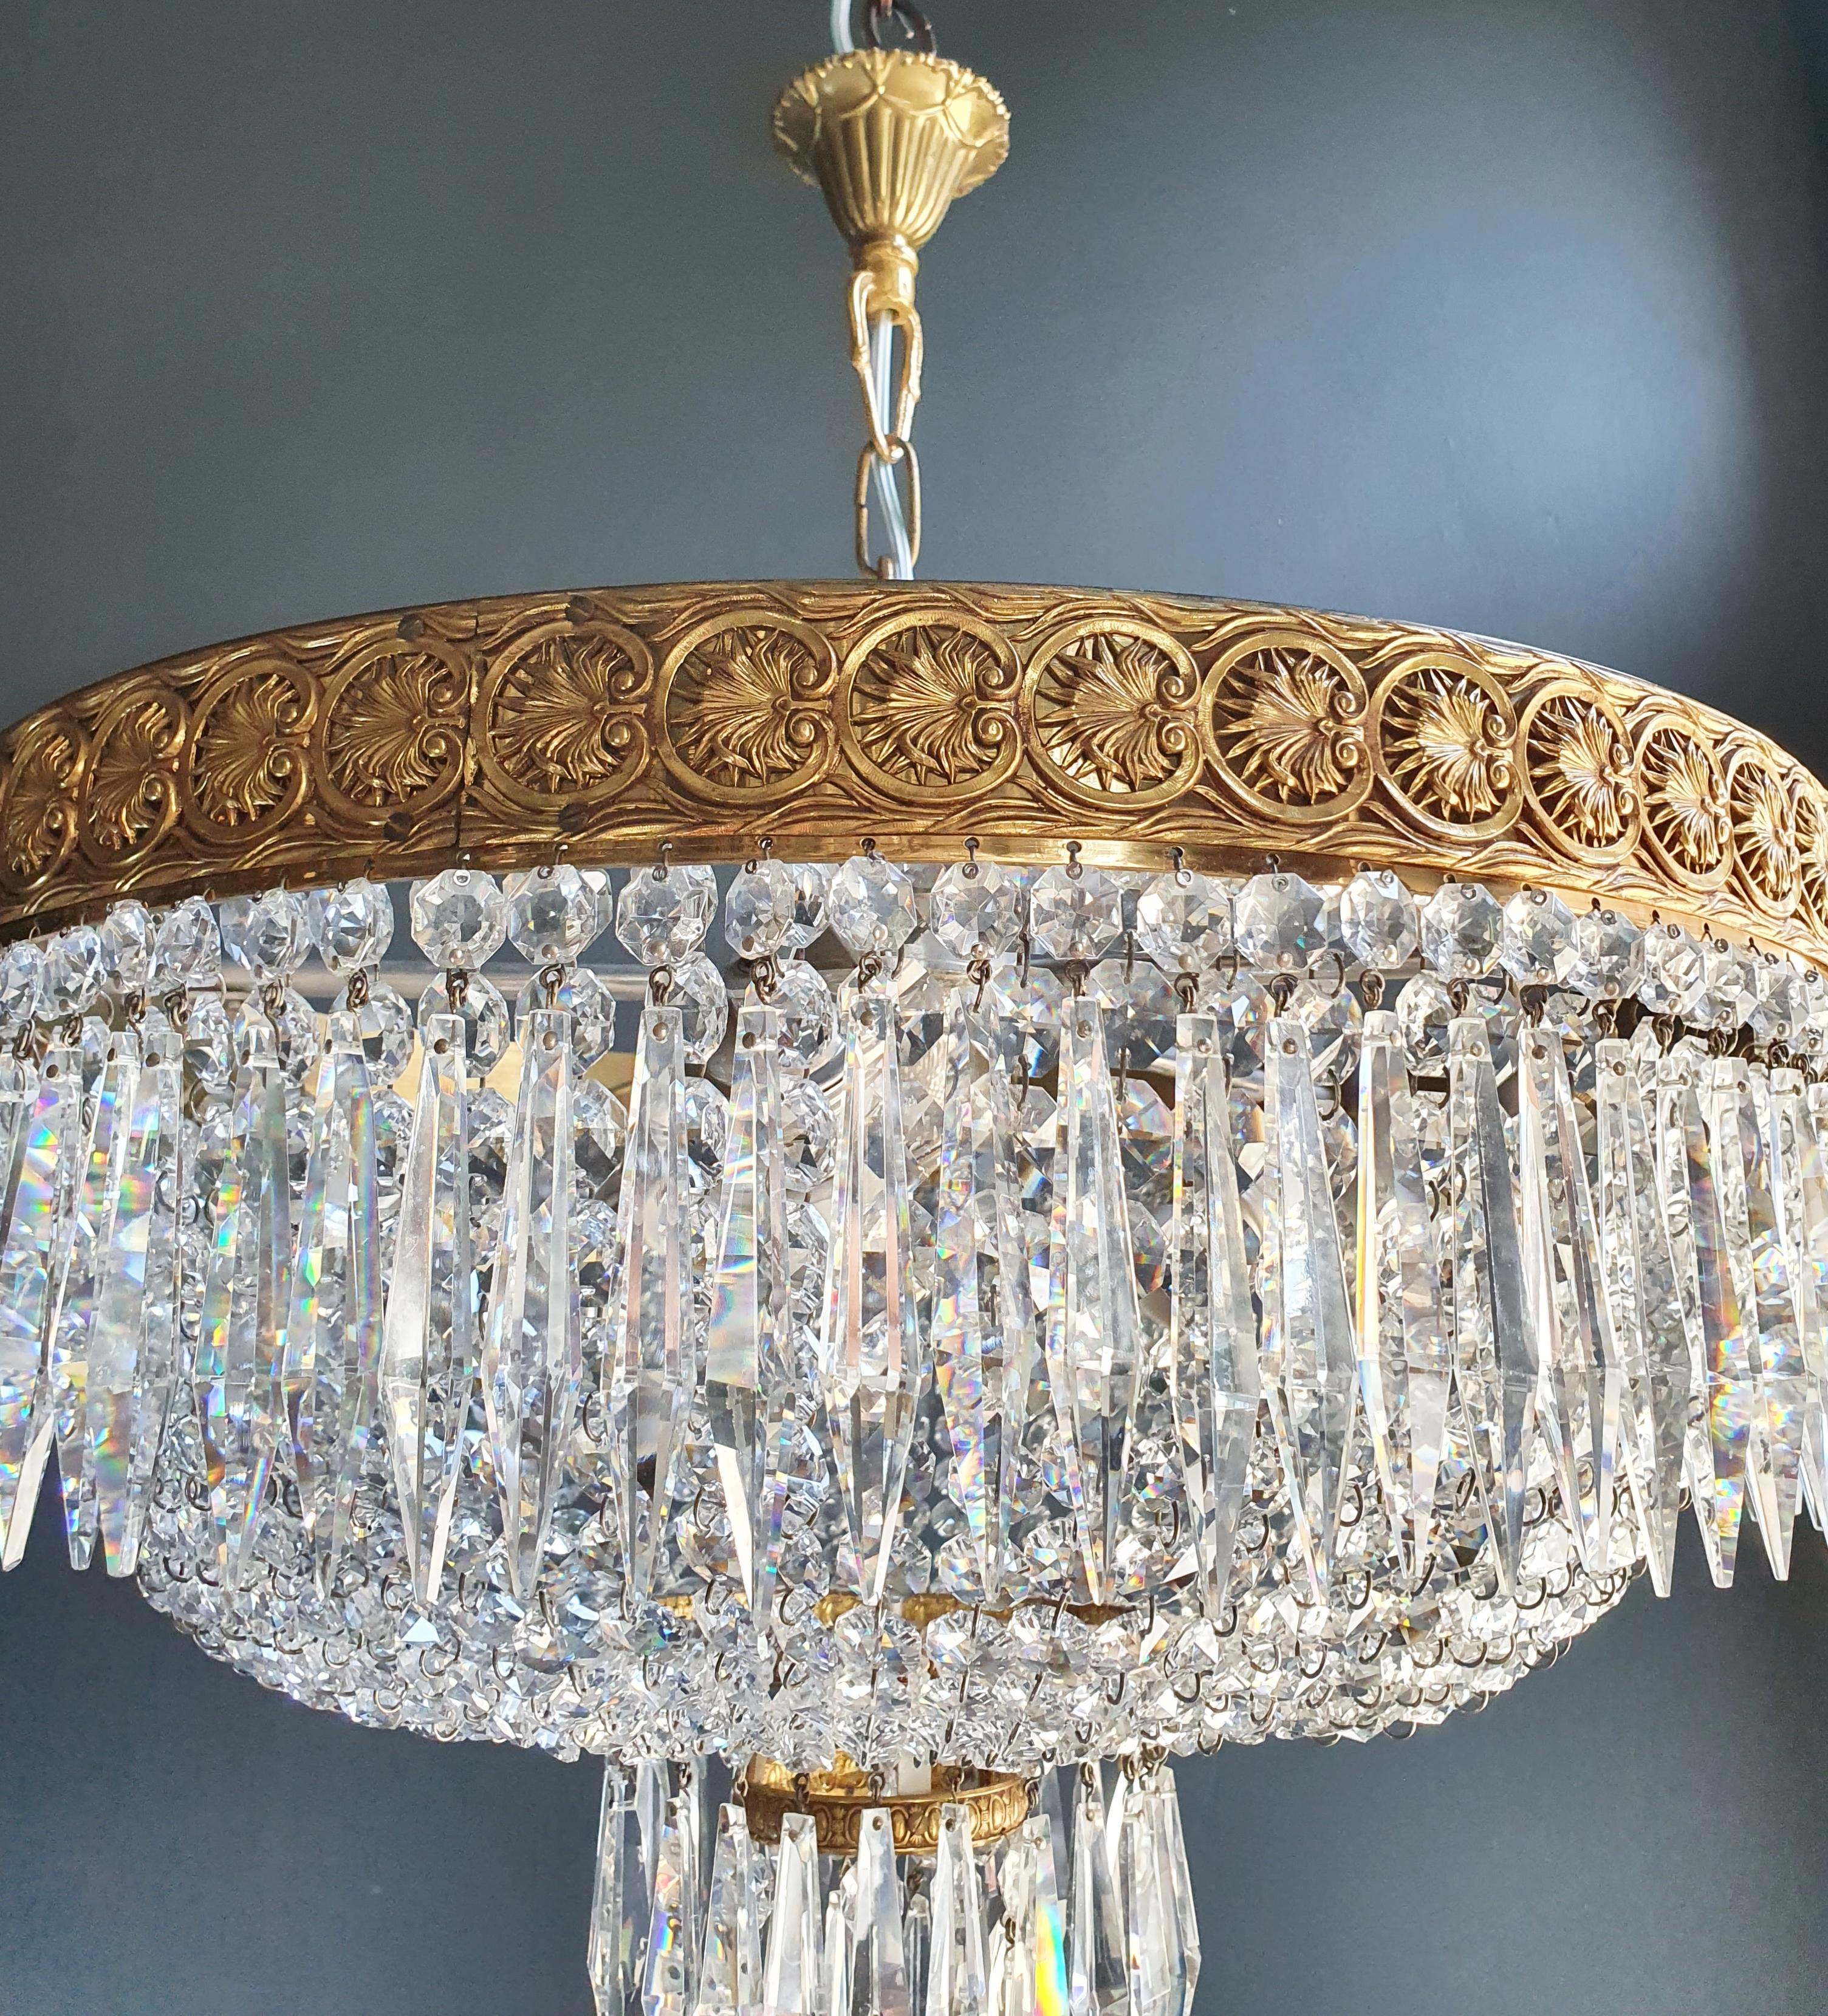 Low oval ceiling crystal chandelier brass.
Cabling completely renewed. Crystal hand knotted.
Measures: Total height 60 cm, height without chain 35 cm, diameter 50 cm. weight (approximately) 10kg.

Number of lights: 5-light bulb sockets: